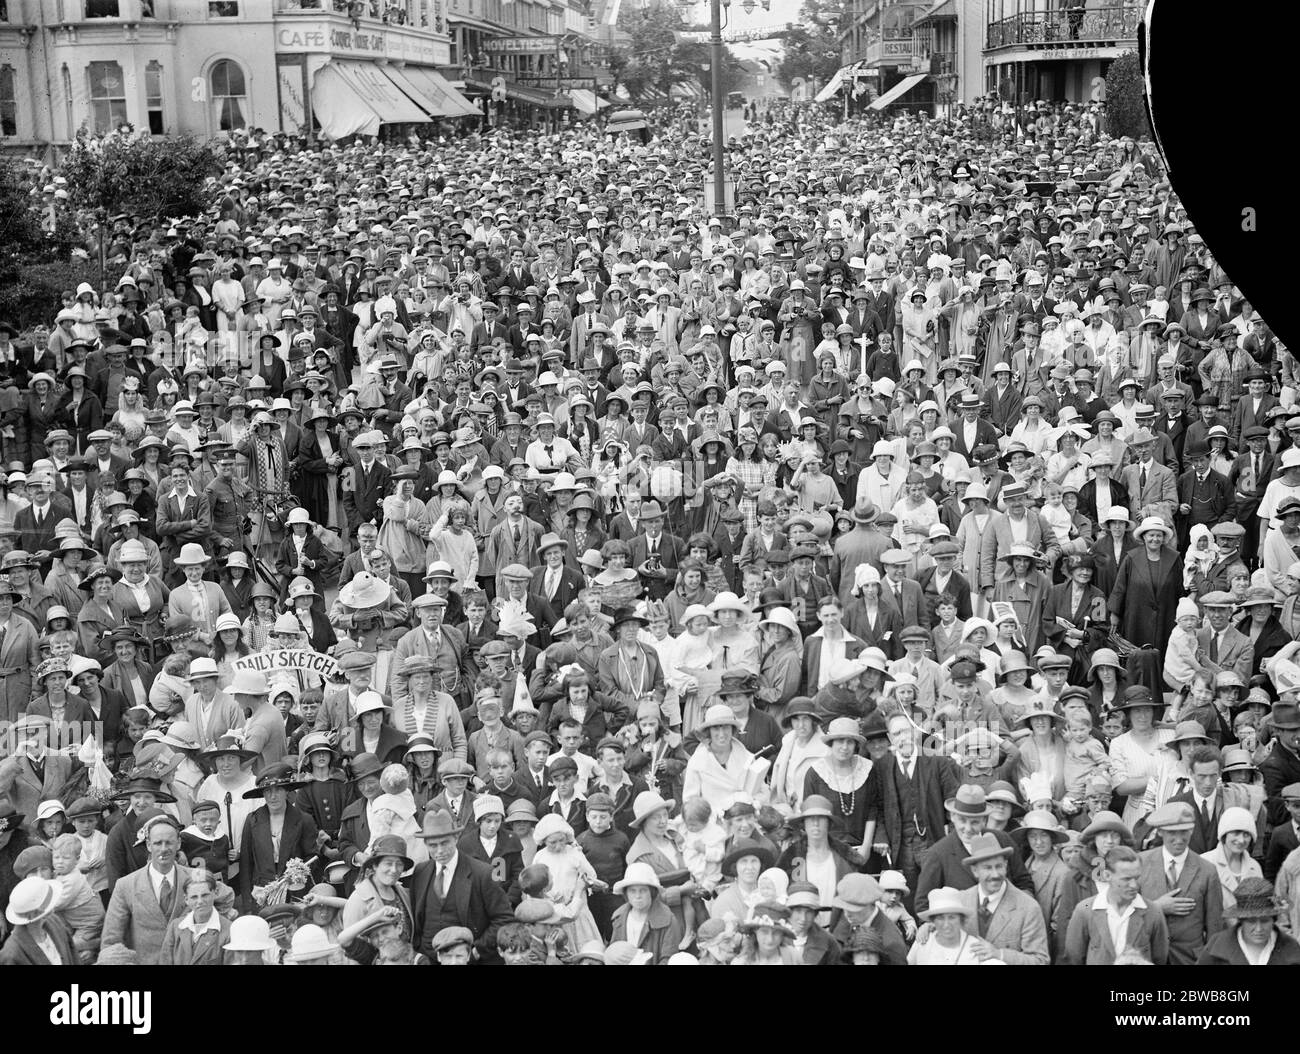 Crowning of carnival King and Queen . The carnival King and Queen were crowned at Clacton - on - Sea in connection with the regatta celebrations . Carnival crowds at Clacton . 24 July 1924 Stock Photo